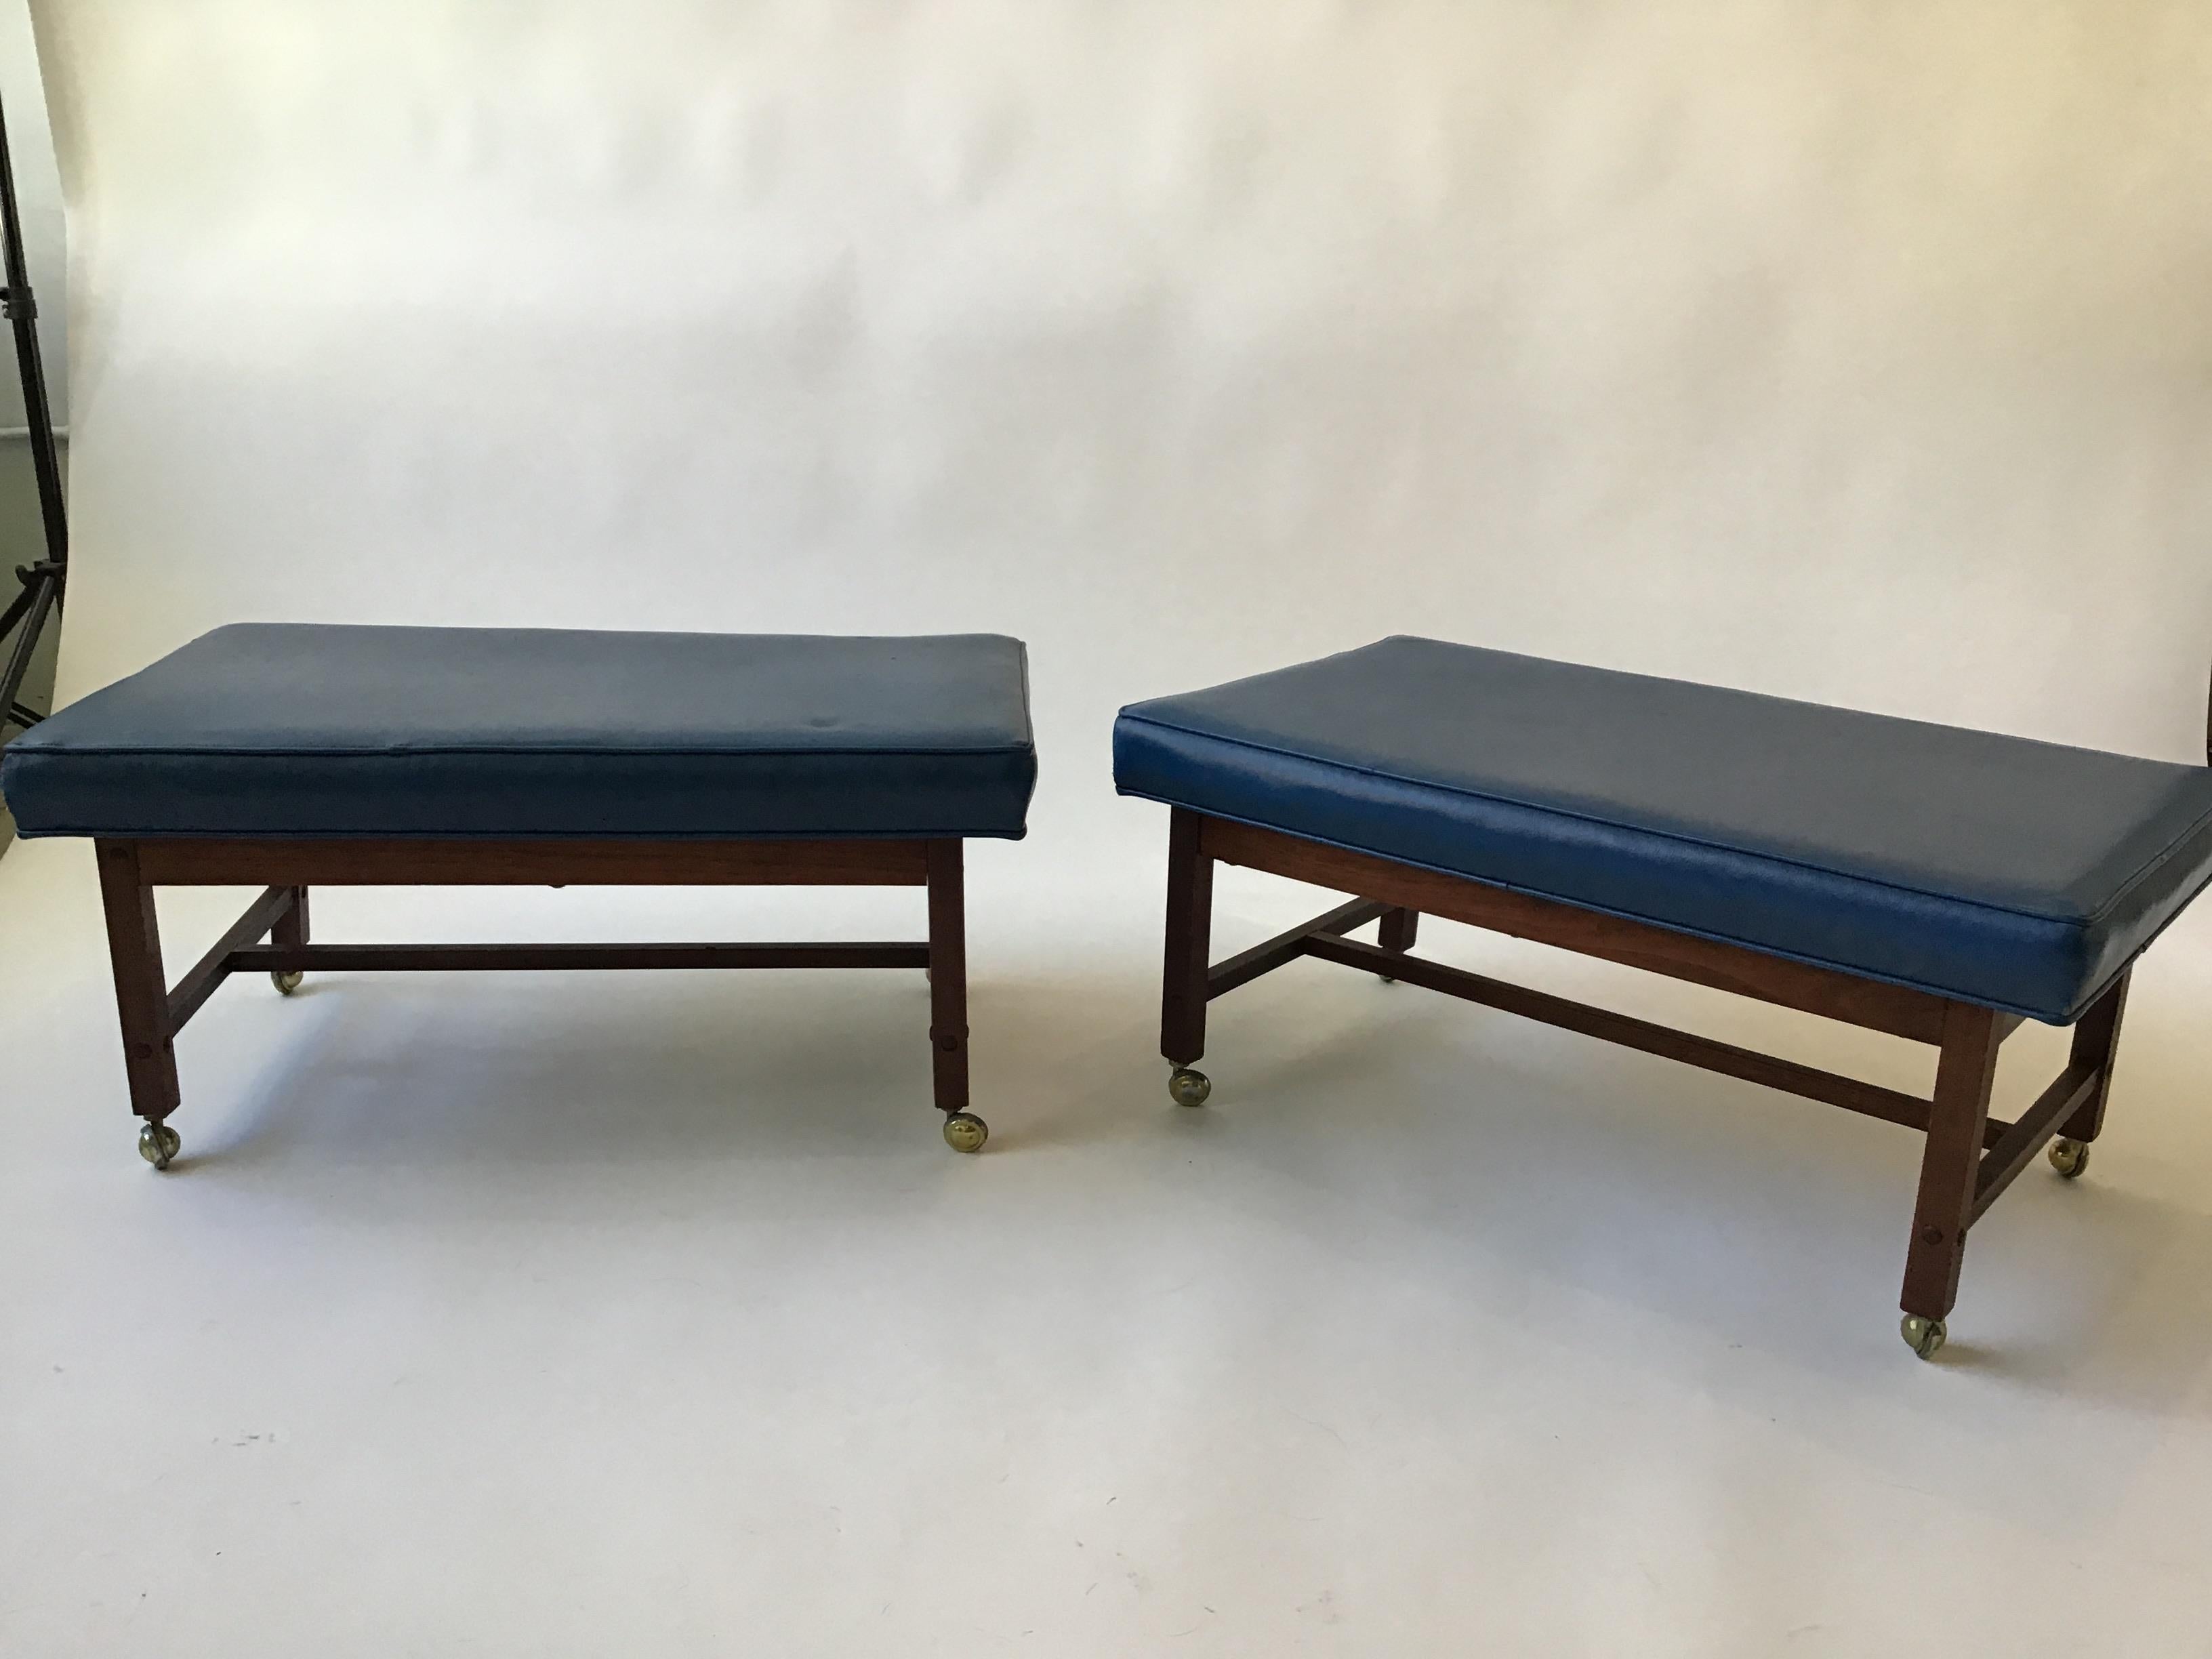 Pair of 1960s ottomans on casters.